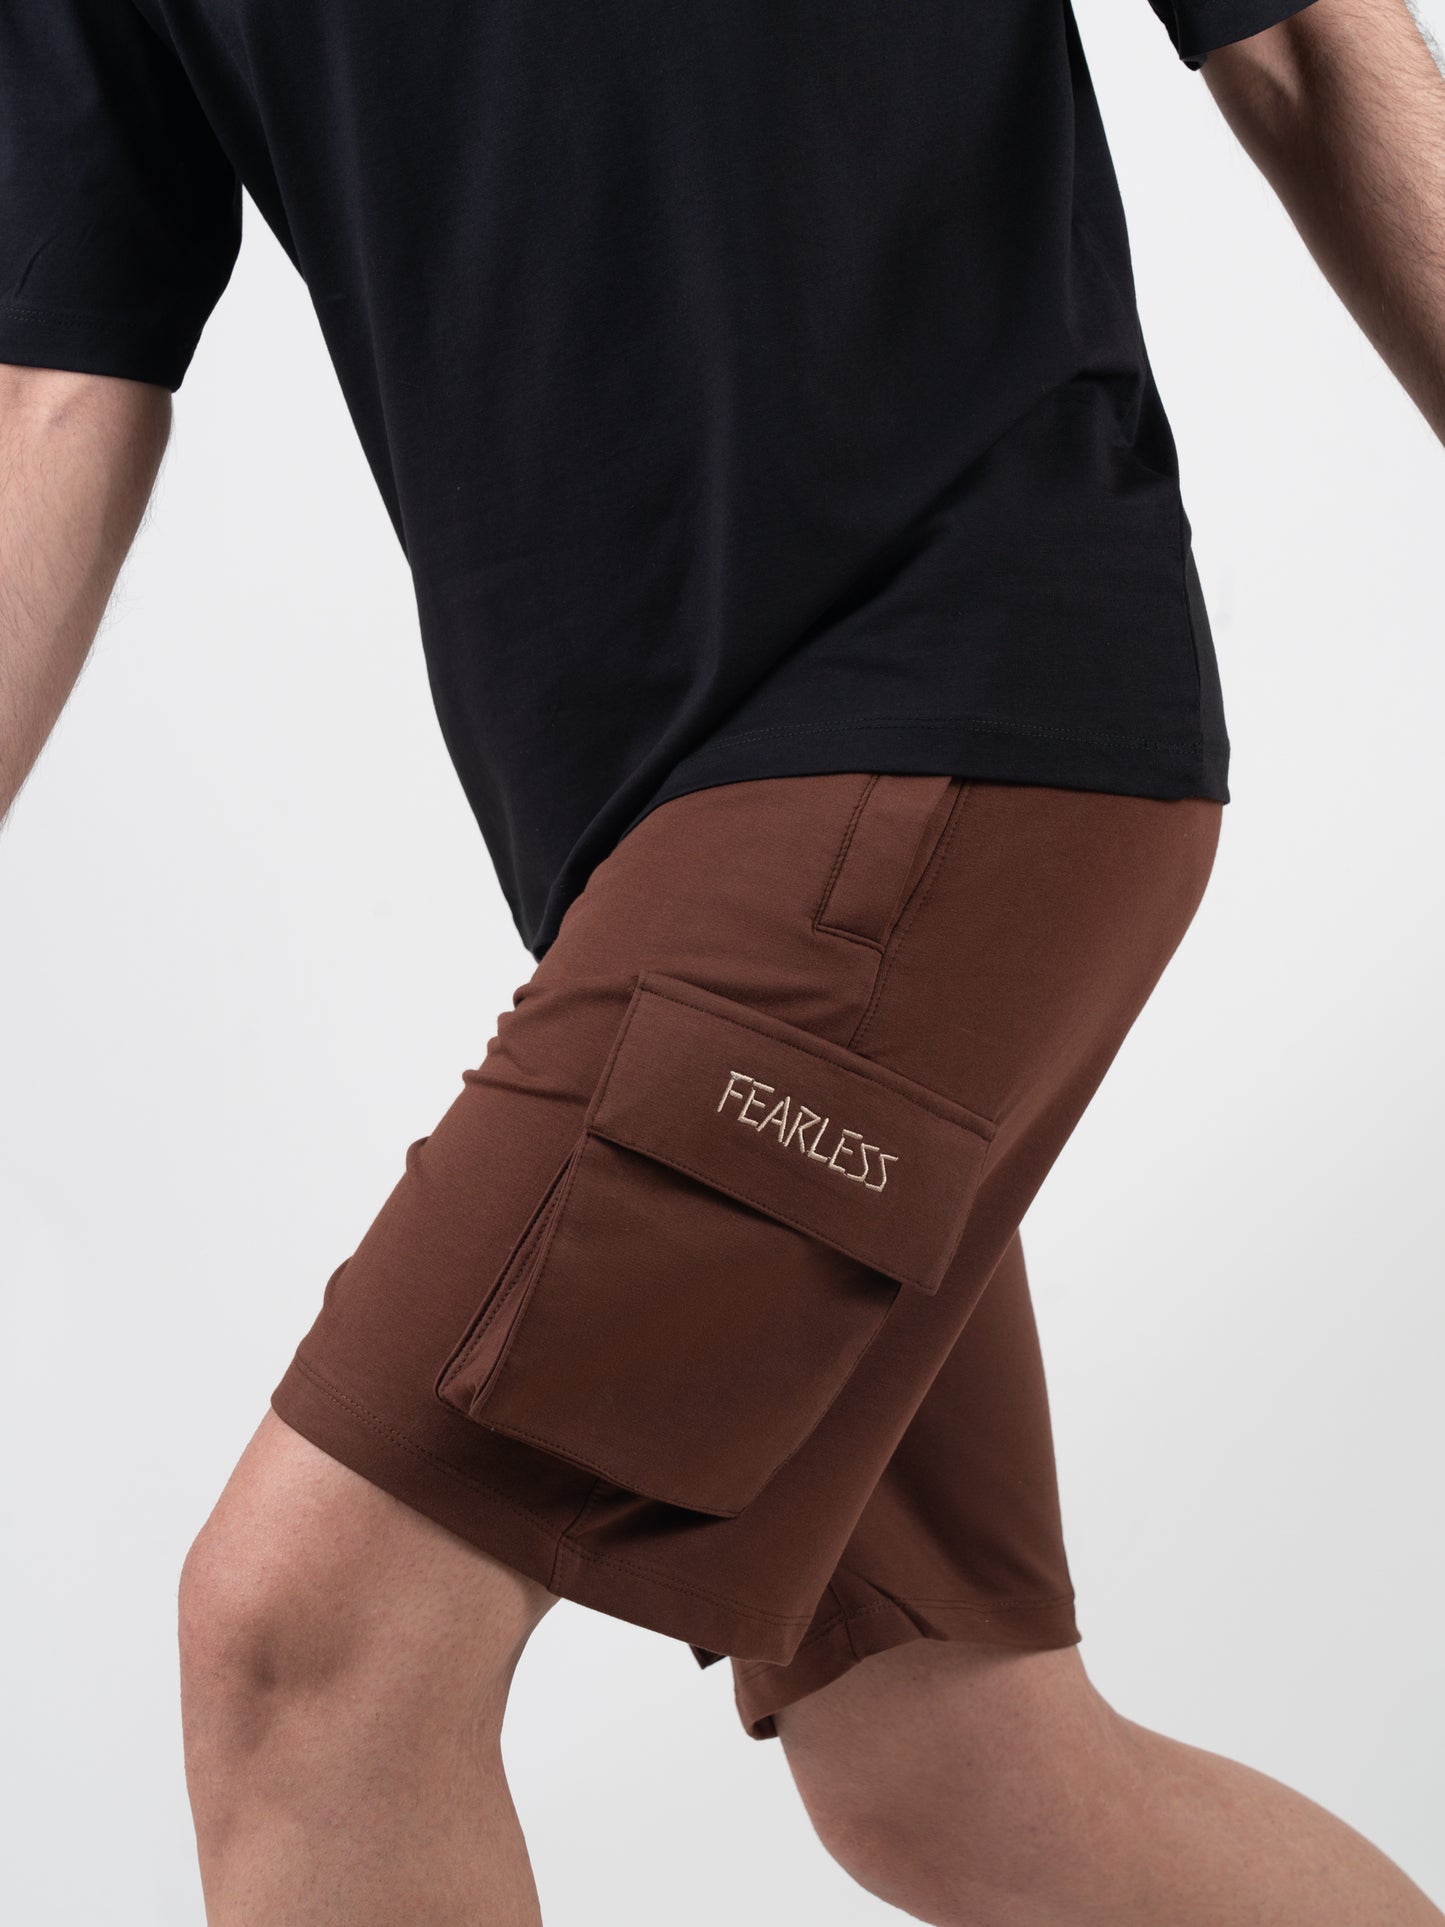 Fearless Cargo Shorts For Men - Brown